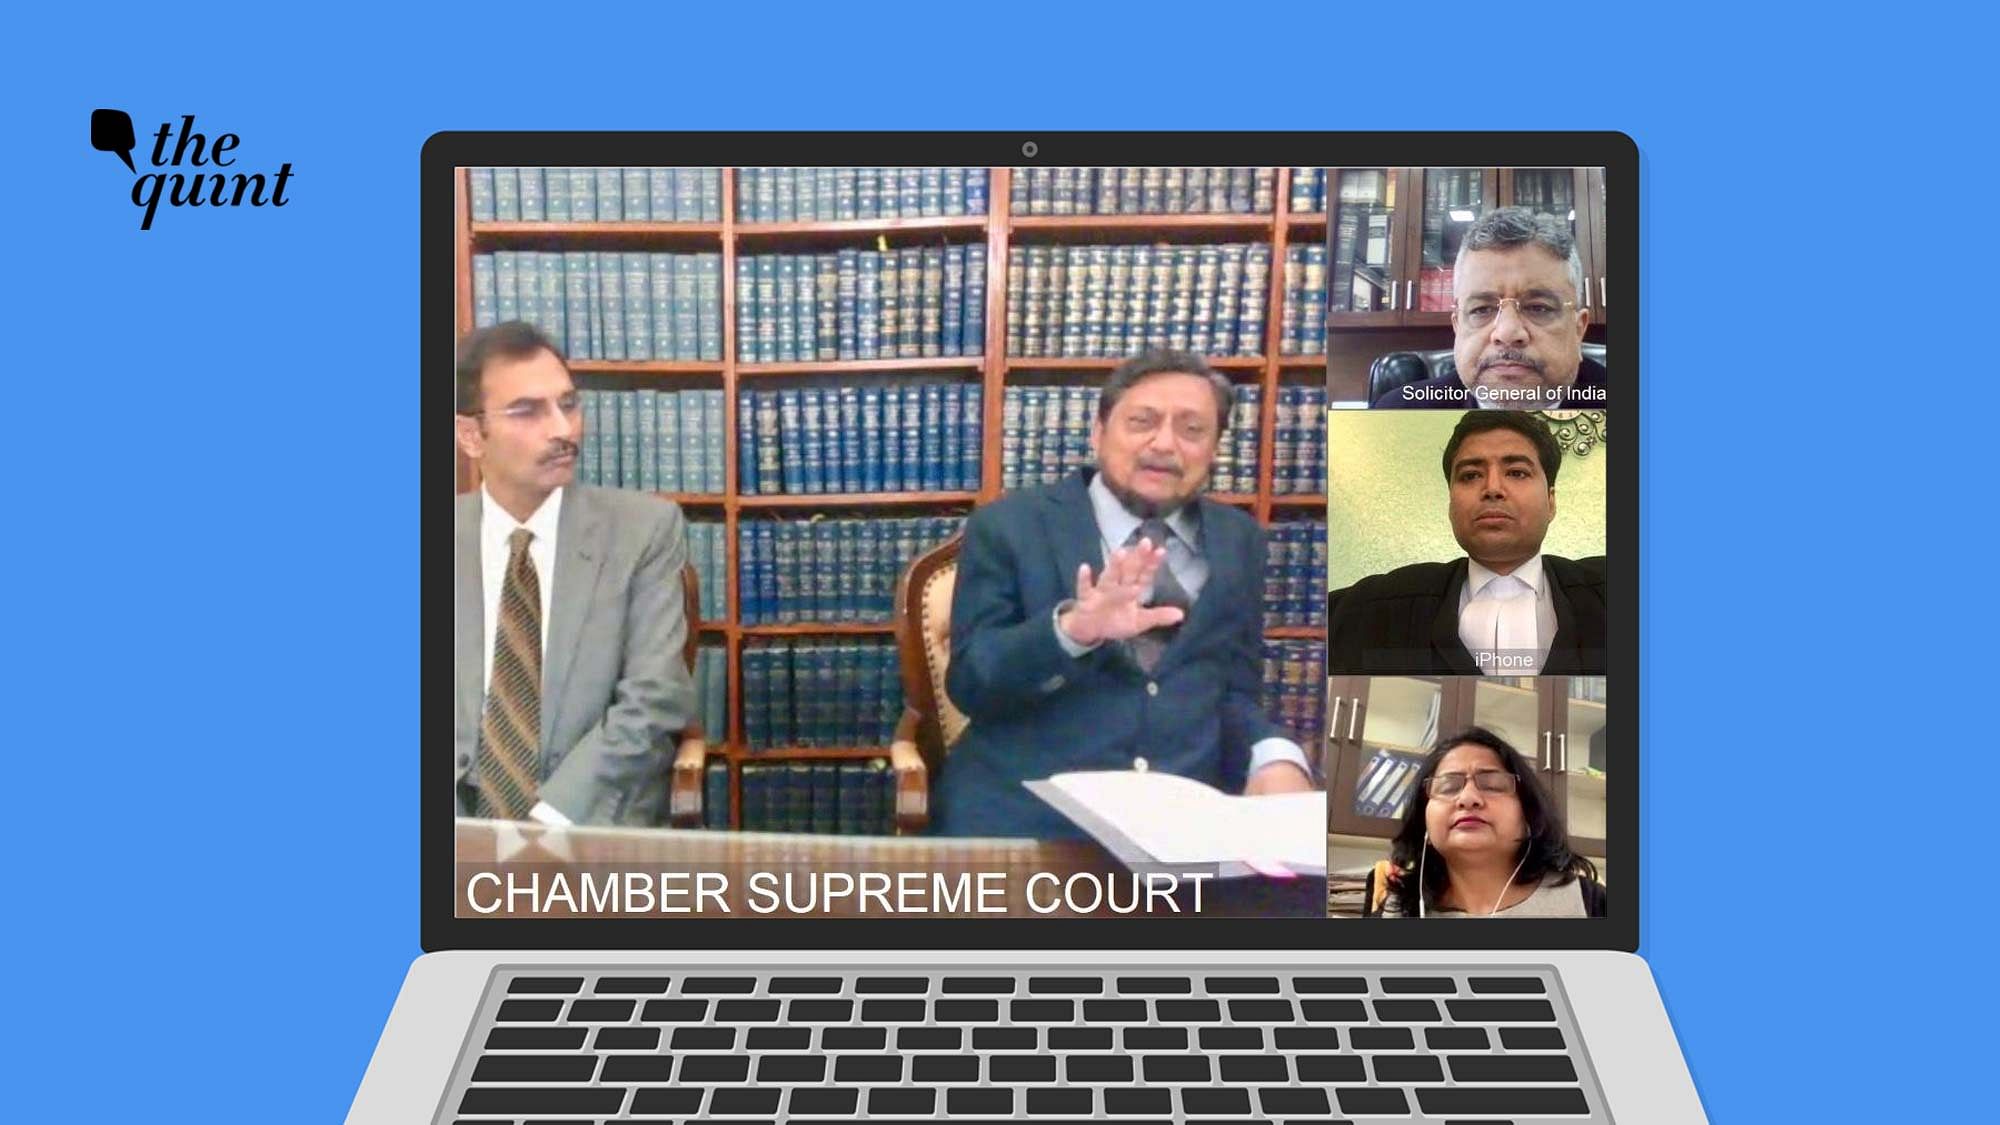 The Supreme Court has conducted hearings via video conferencing for the last week.